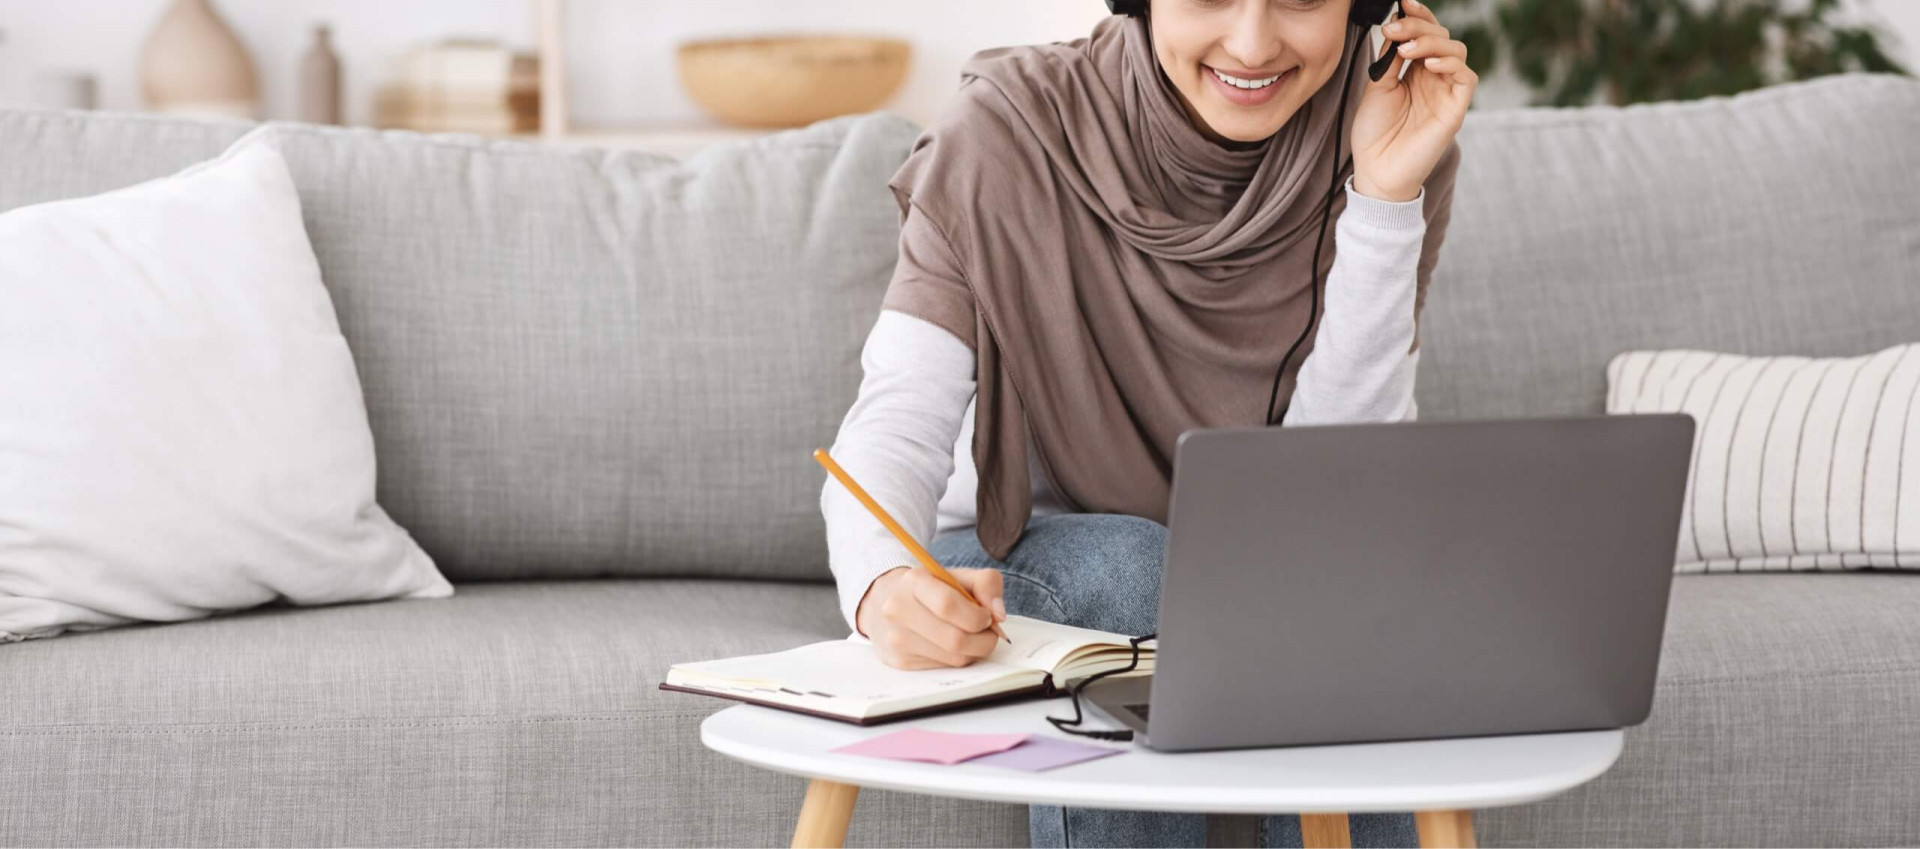 woman sitting on sofa wearing hijab and casual clothes working from home with headset and laptop